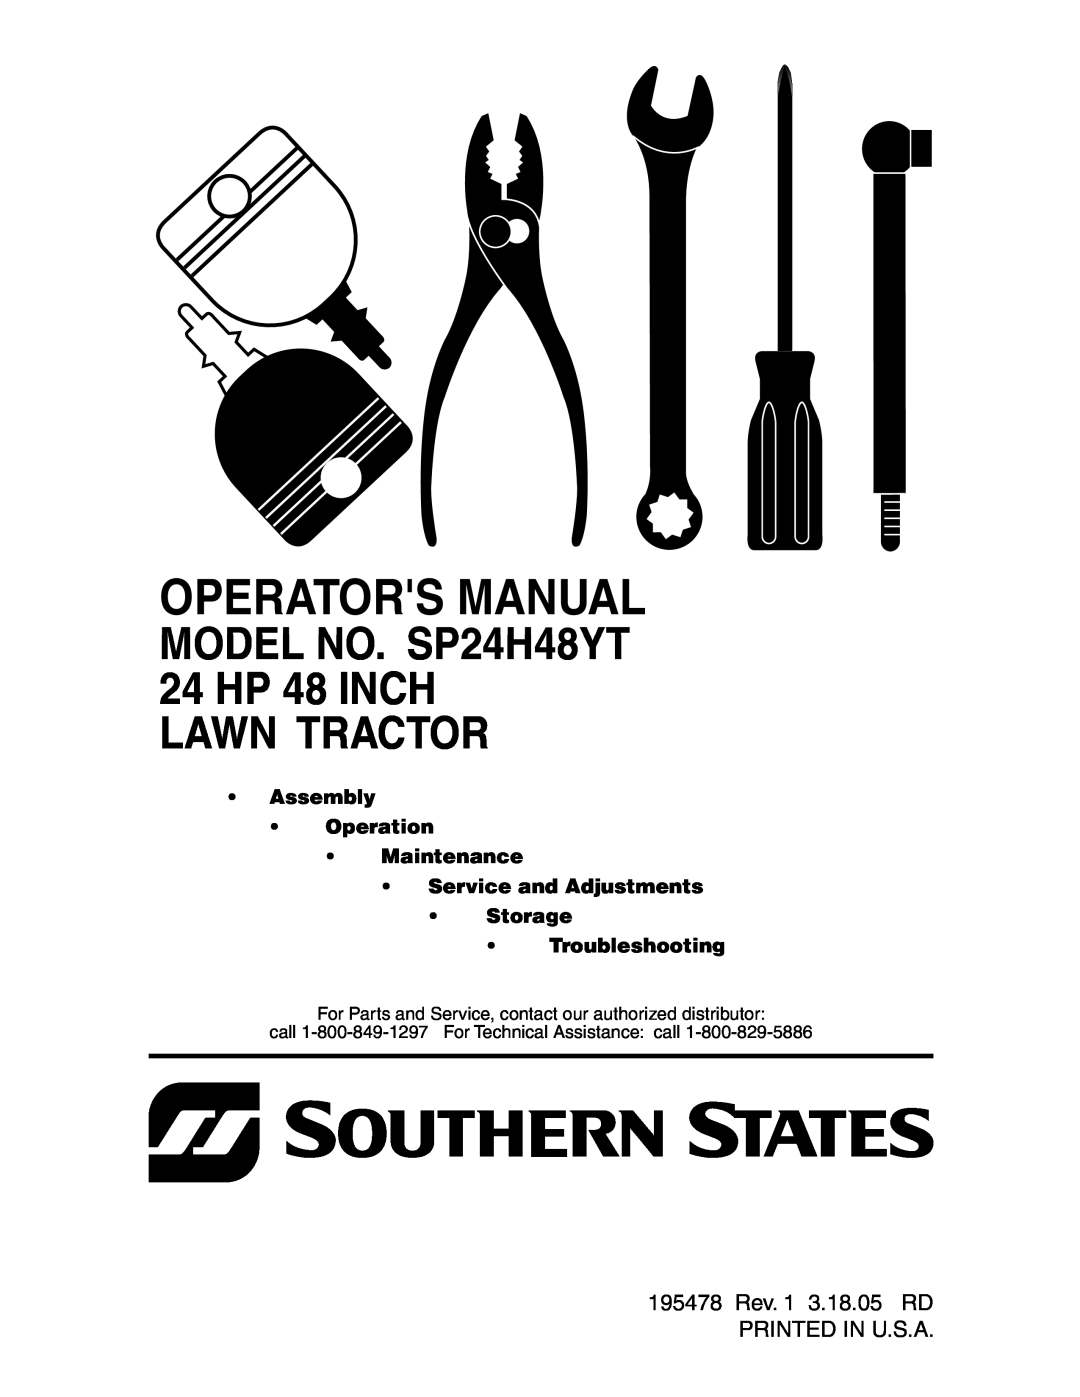 Poulan SP24H48YT manual 195478 Rev. 1 3.18.05 RD PRINTED IN U.S.A, Operators Manual, Lawn Tractor, Troubleshooting 